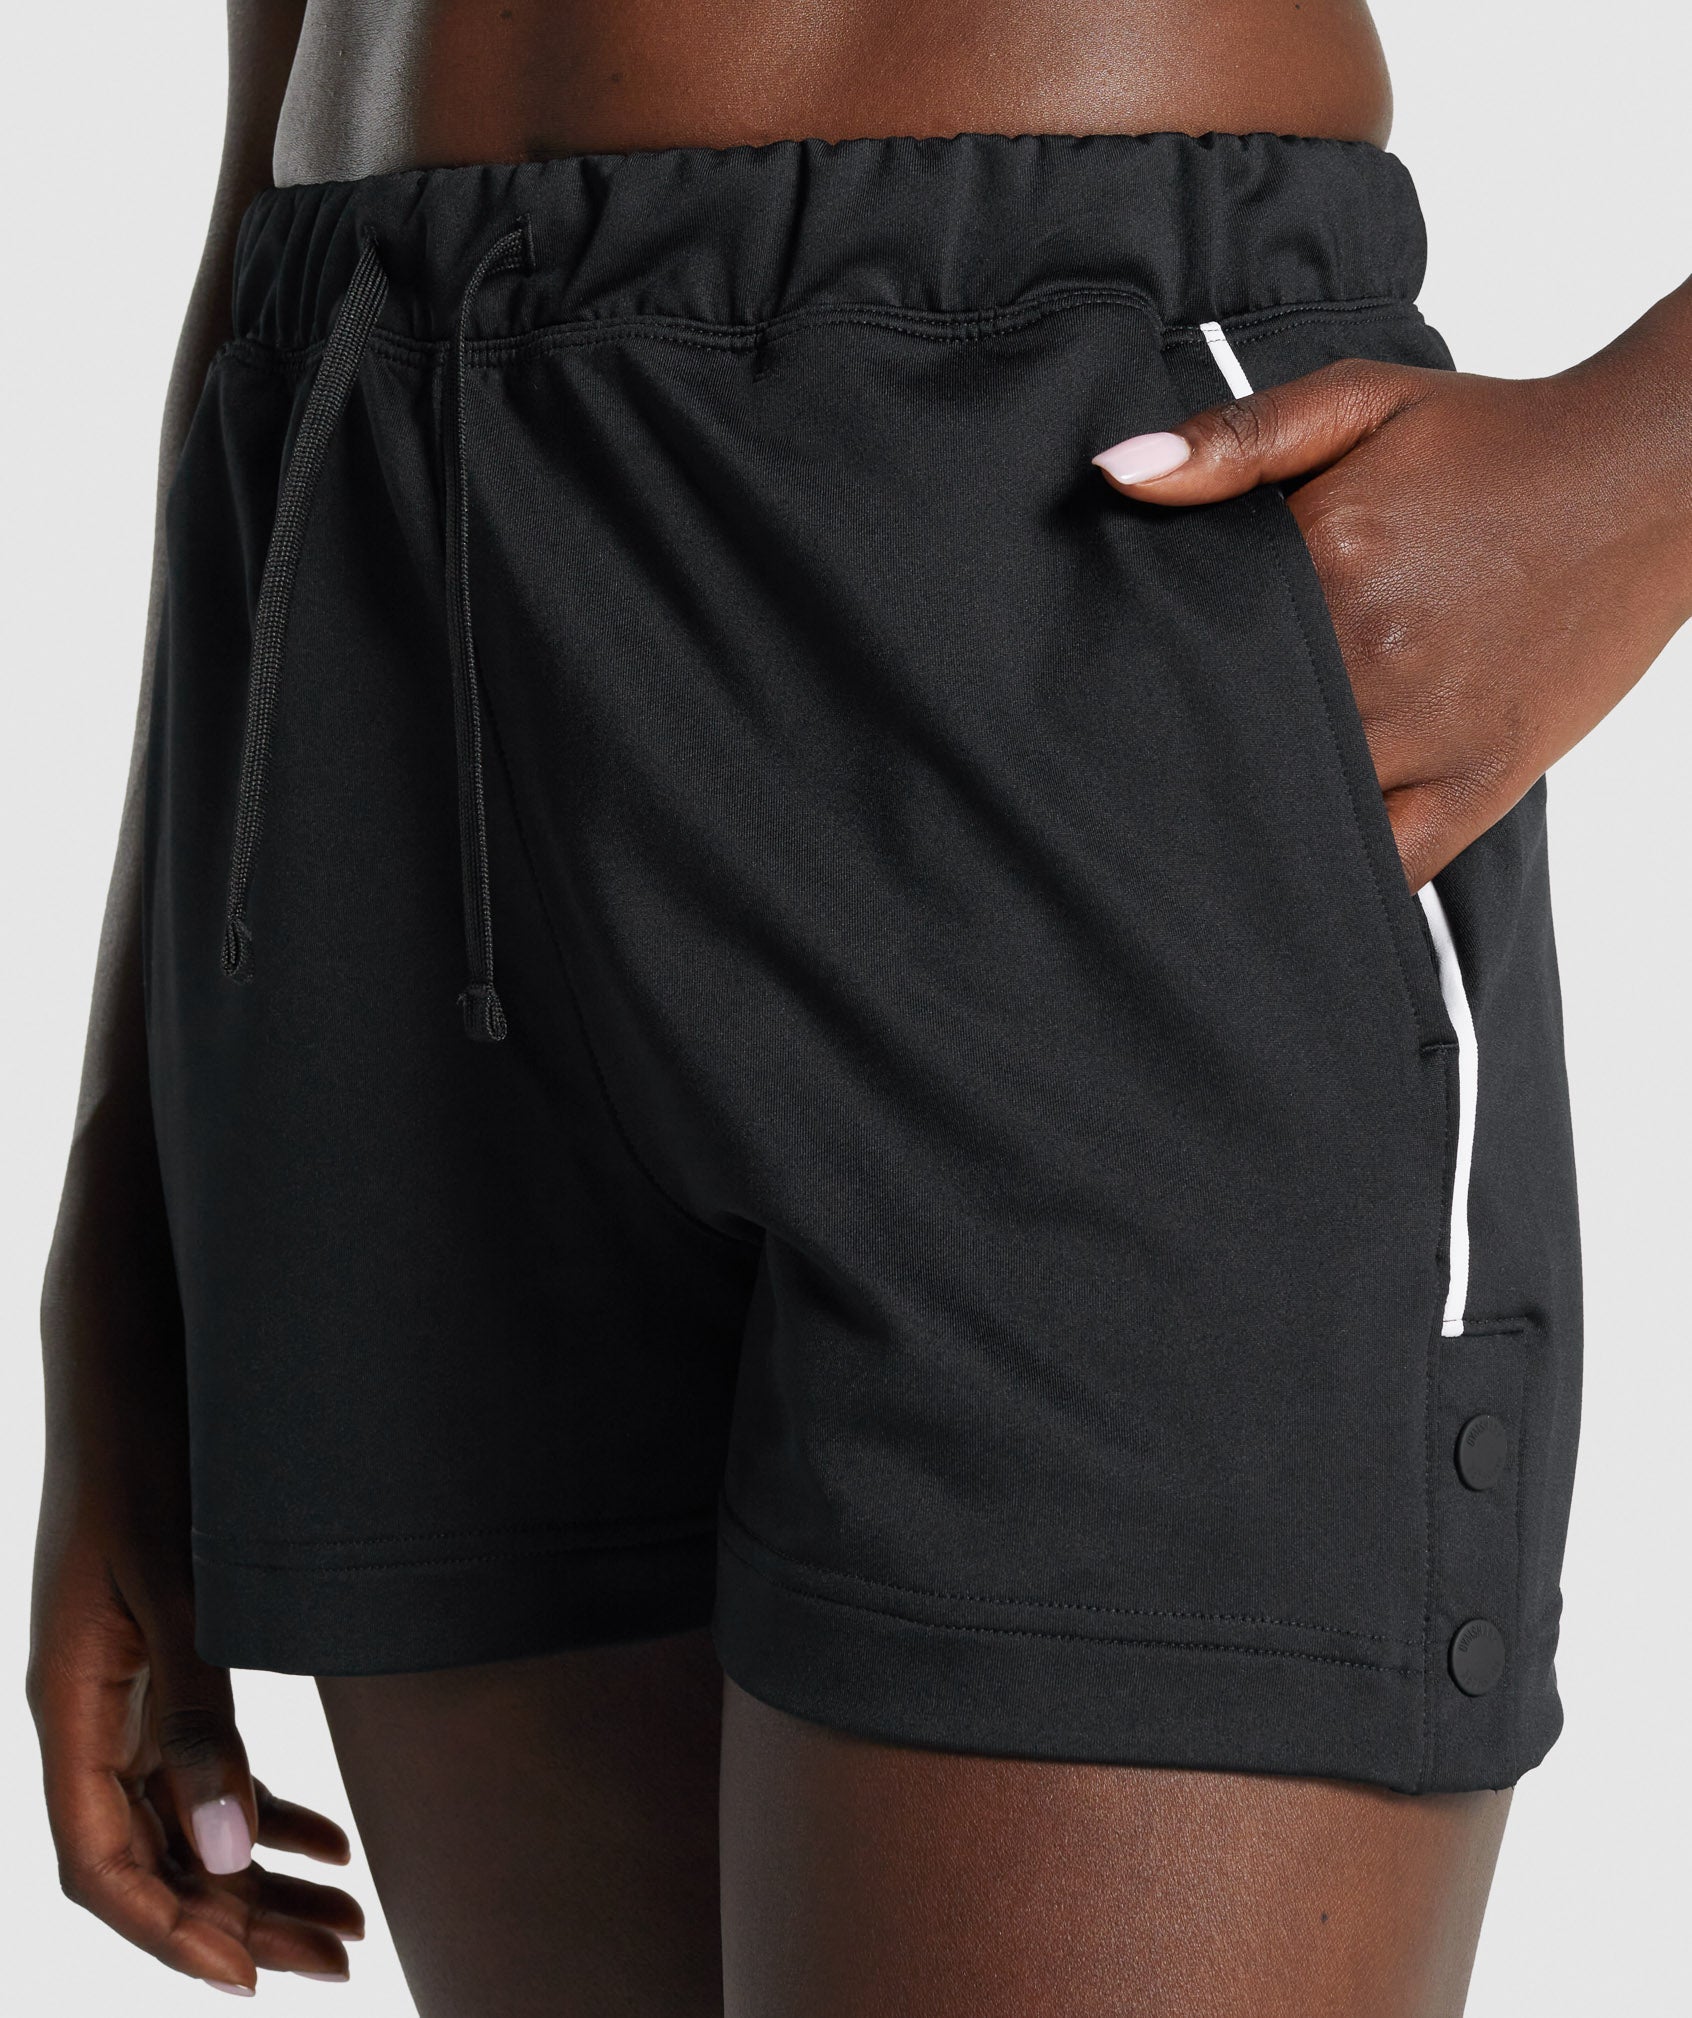 Recess Shorts in Black - view 7